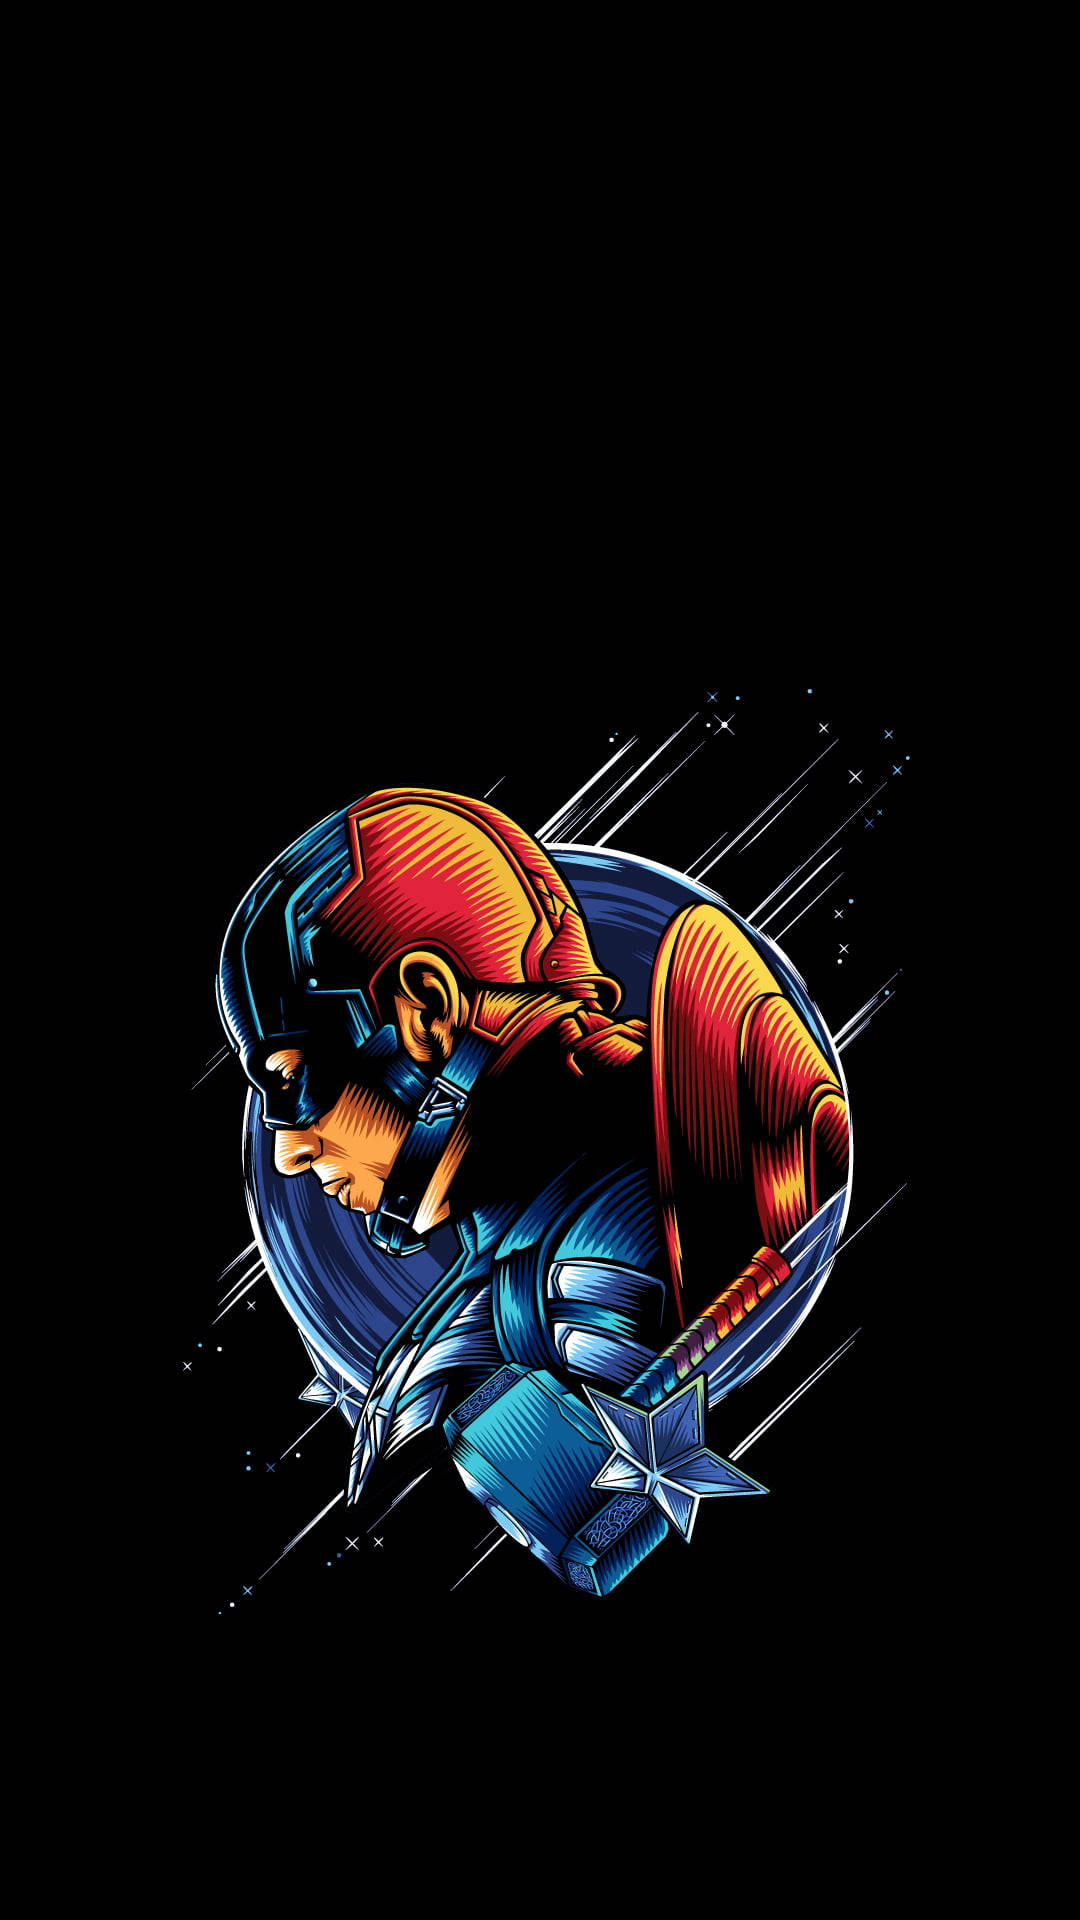 Captain America, the ultimate symbol of bravery and courage. Wallpaper